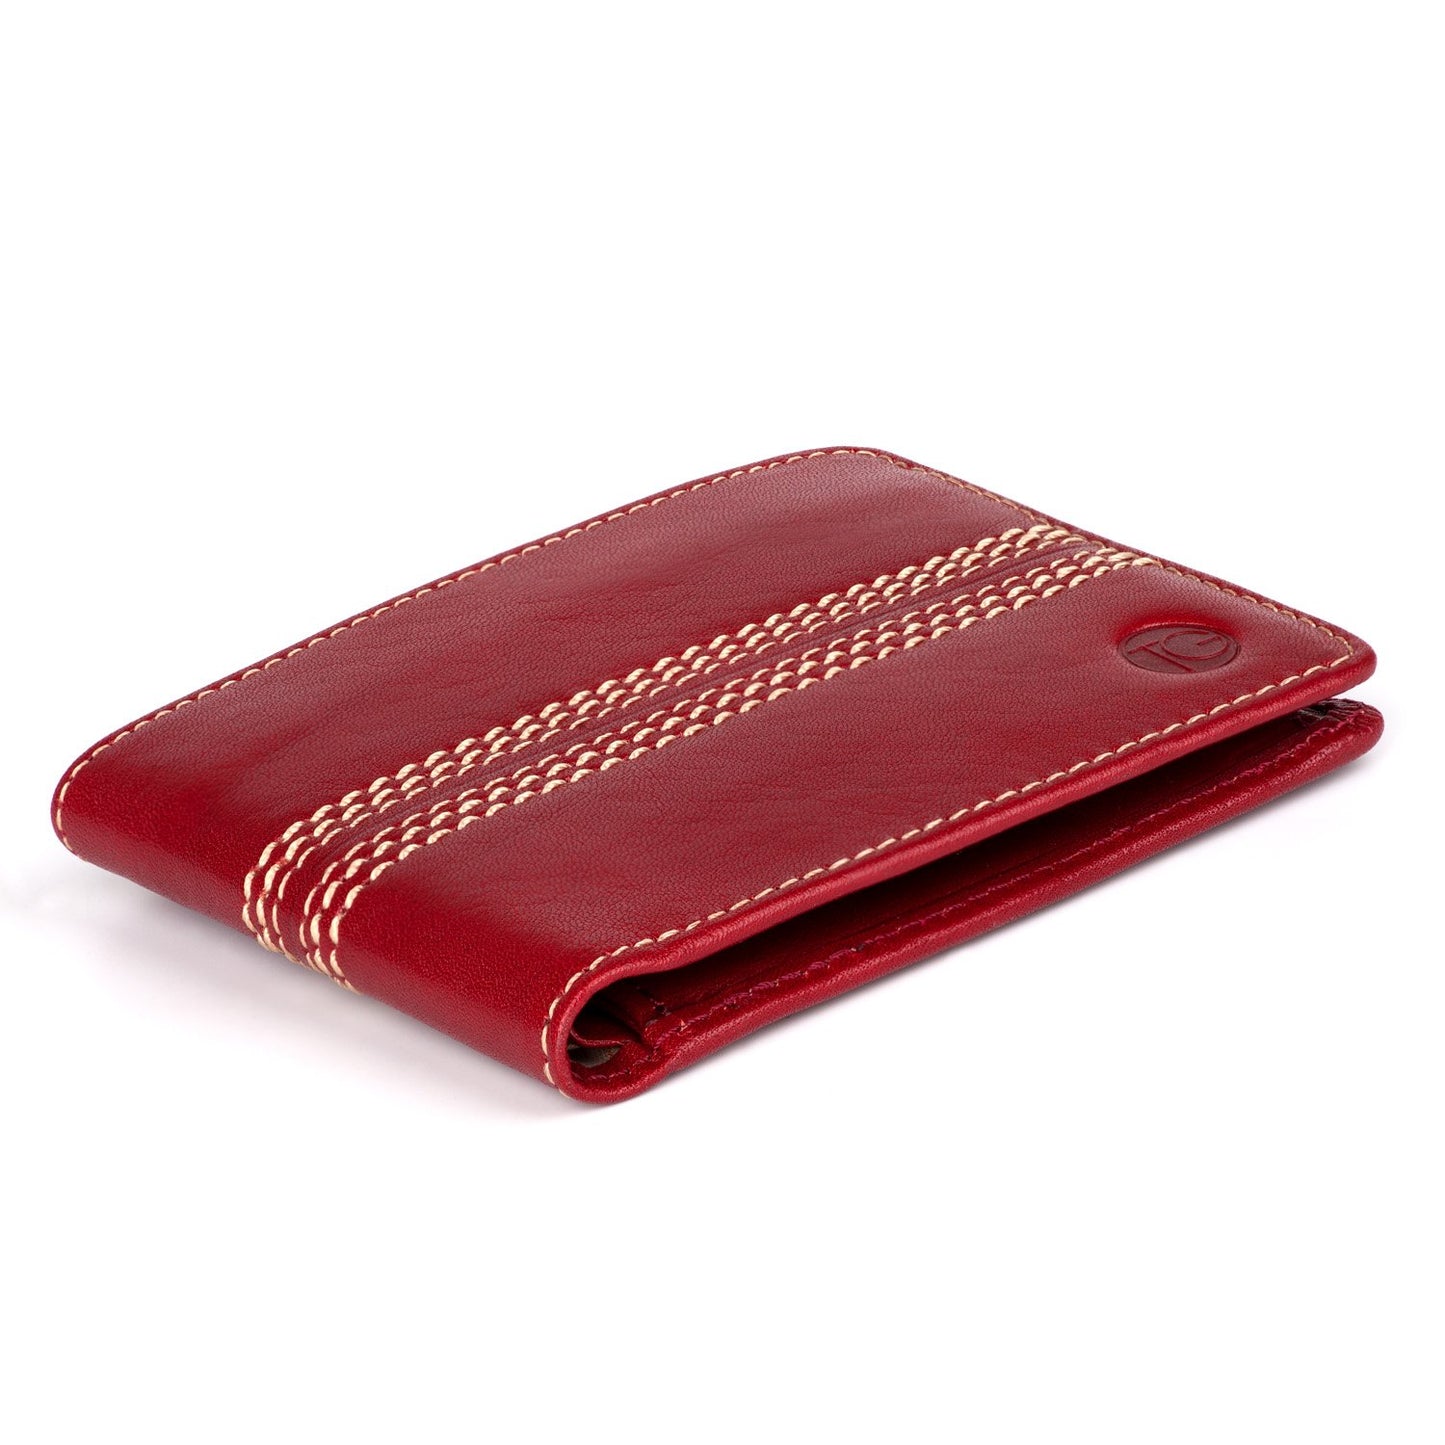 The All - Rounder Men's Wallet